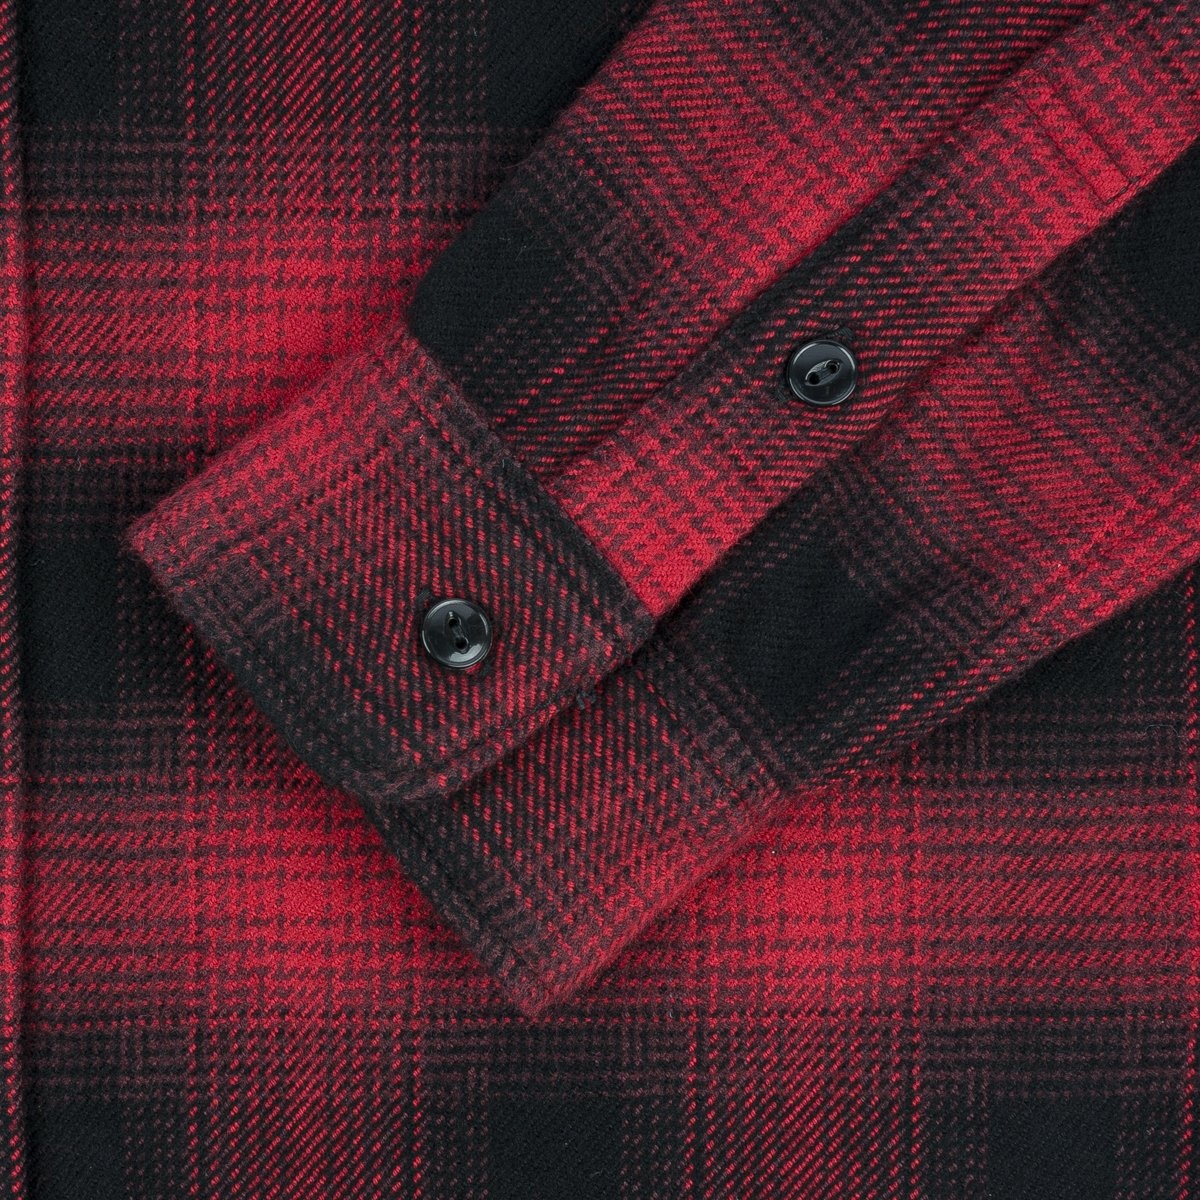 IHSH-265-RED Ultra Heavy Flannel Ombré Check Work Shirt - Red/Black - 10